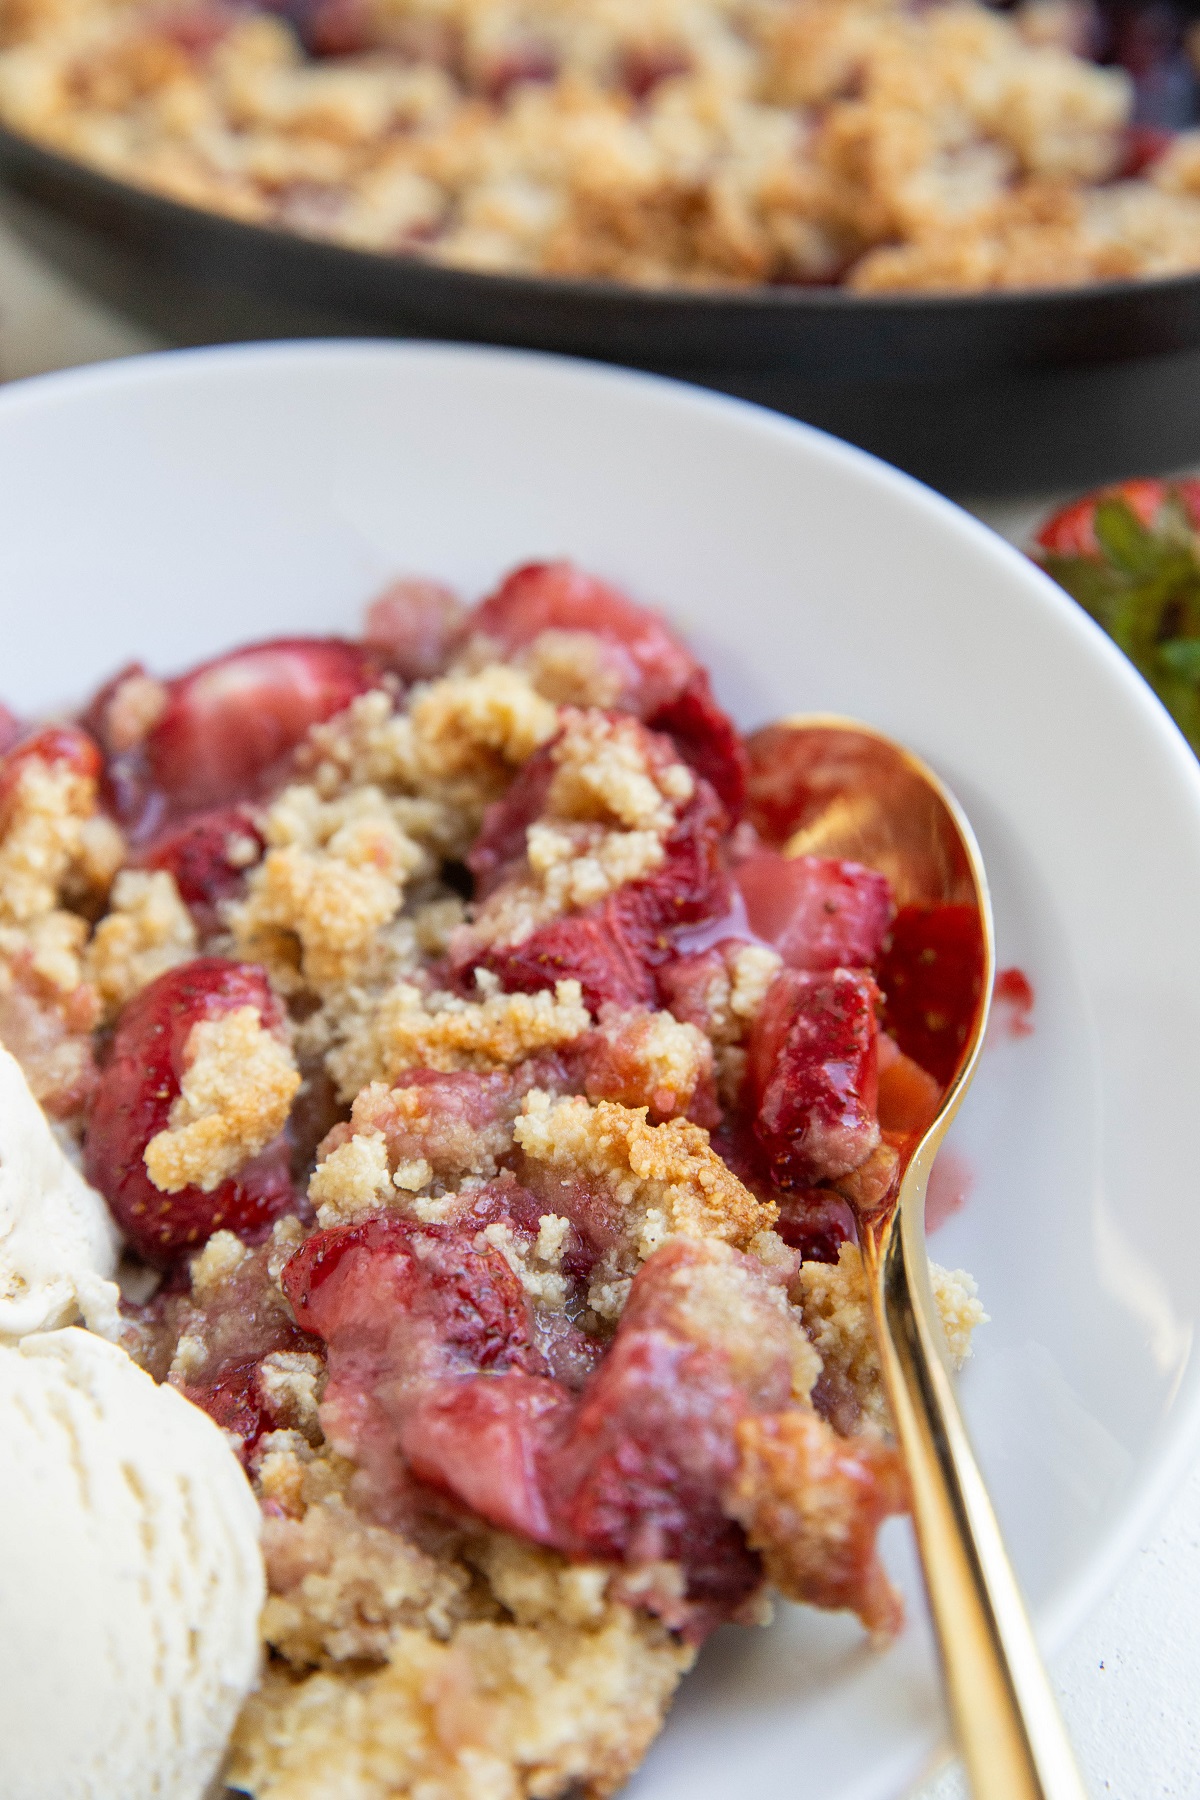 grain-free strawberry crumble in a white bowl with vanilla ice cream and a gold spoon.